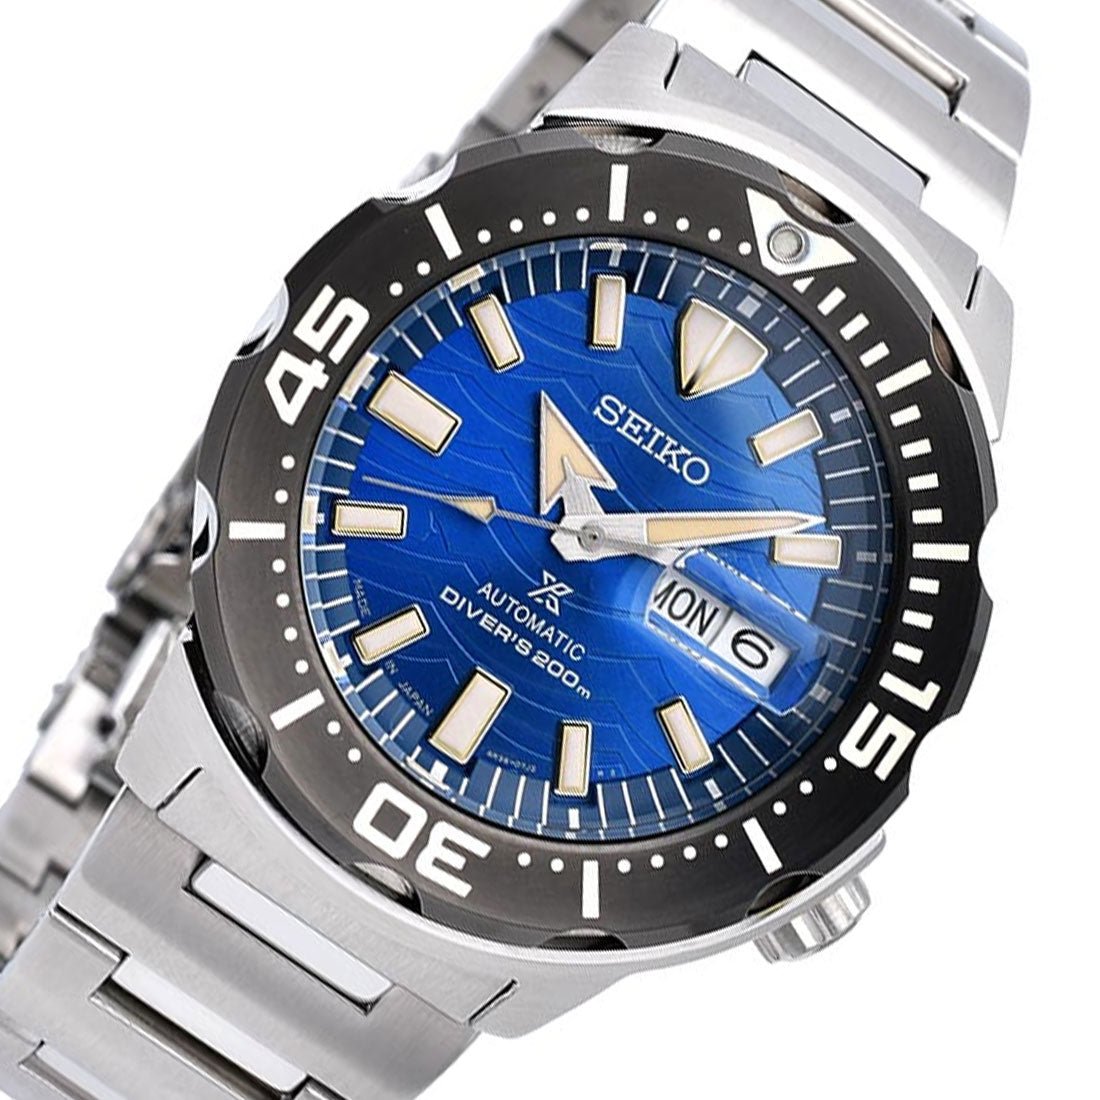 Seiko Prospex SBDY045 Monster JDM Save the Ocean Gents Watch -Seiko